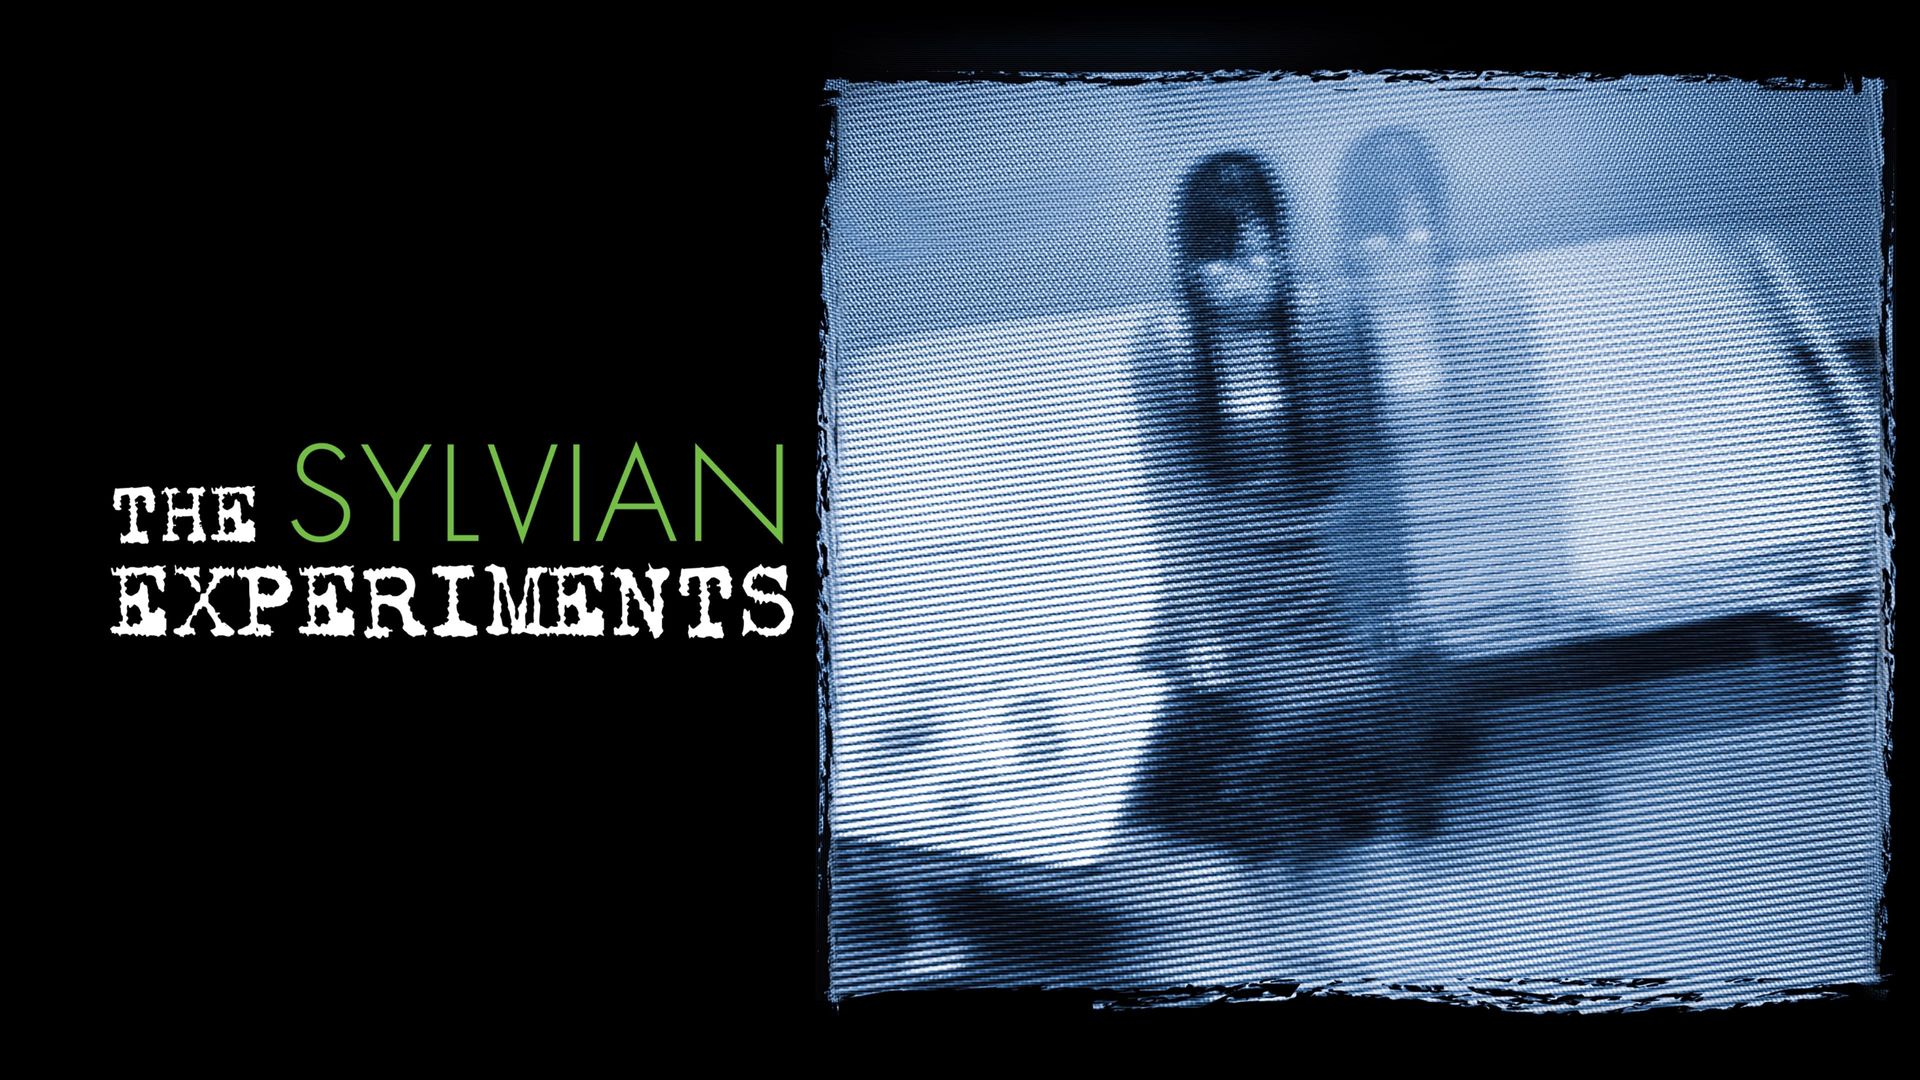 The Sylvian Experiments background